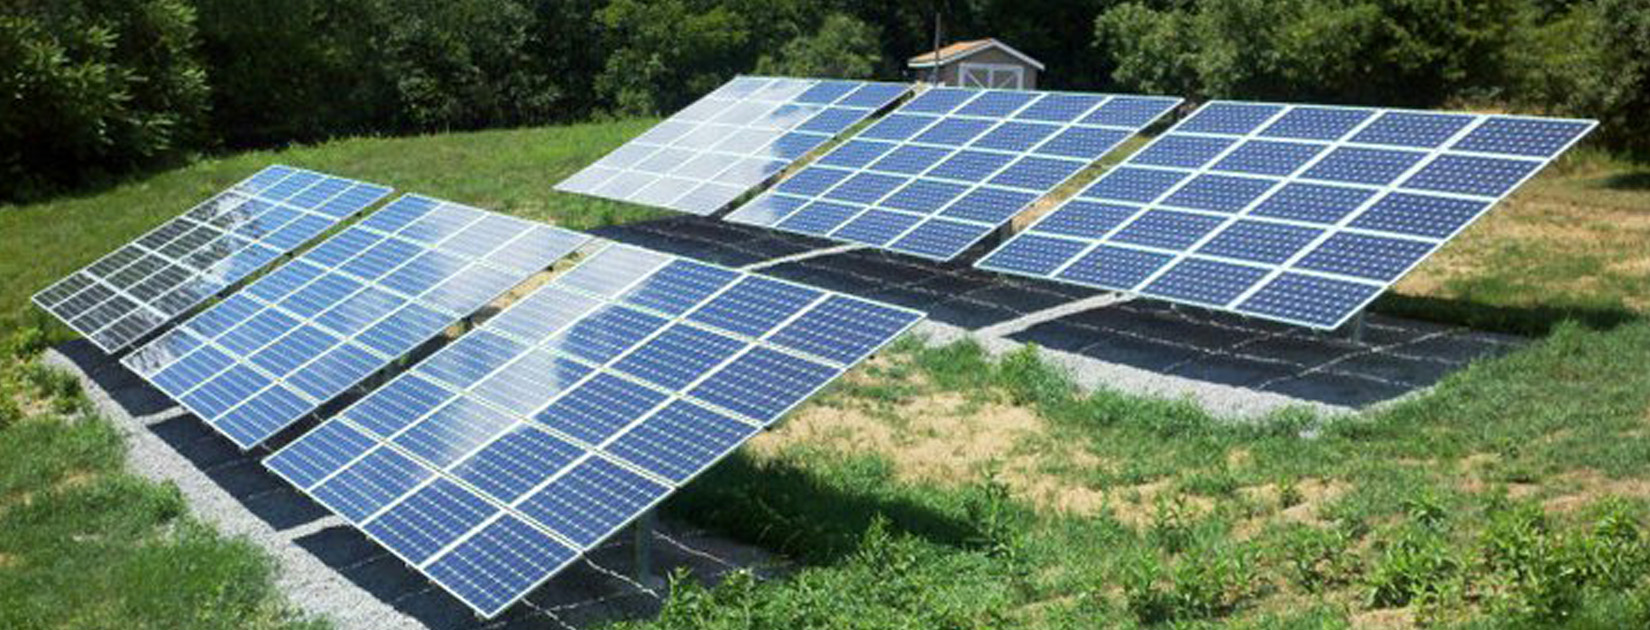 solar panels for agriculture in western pa